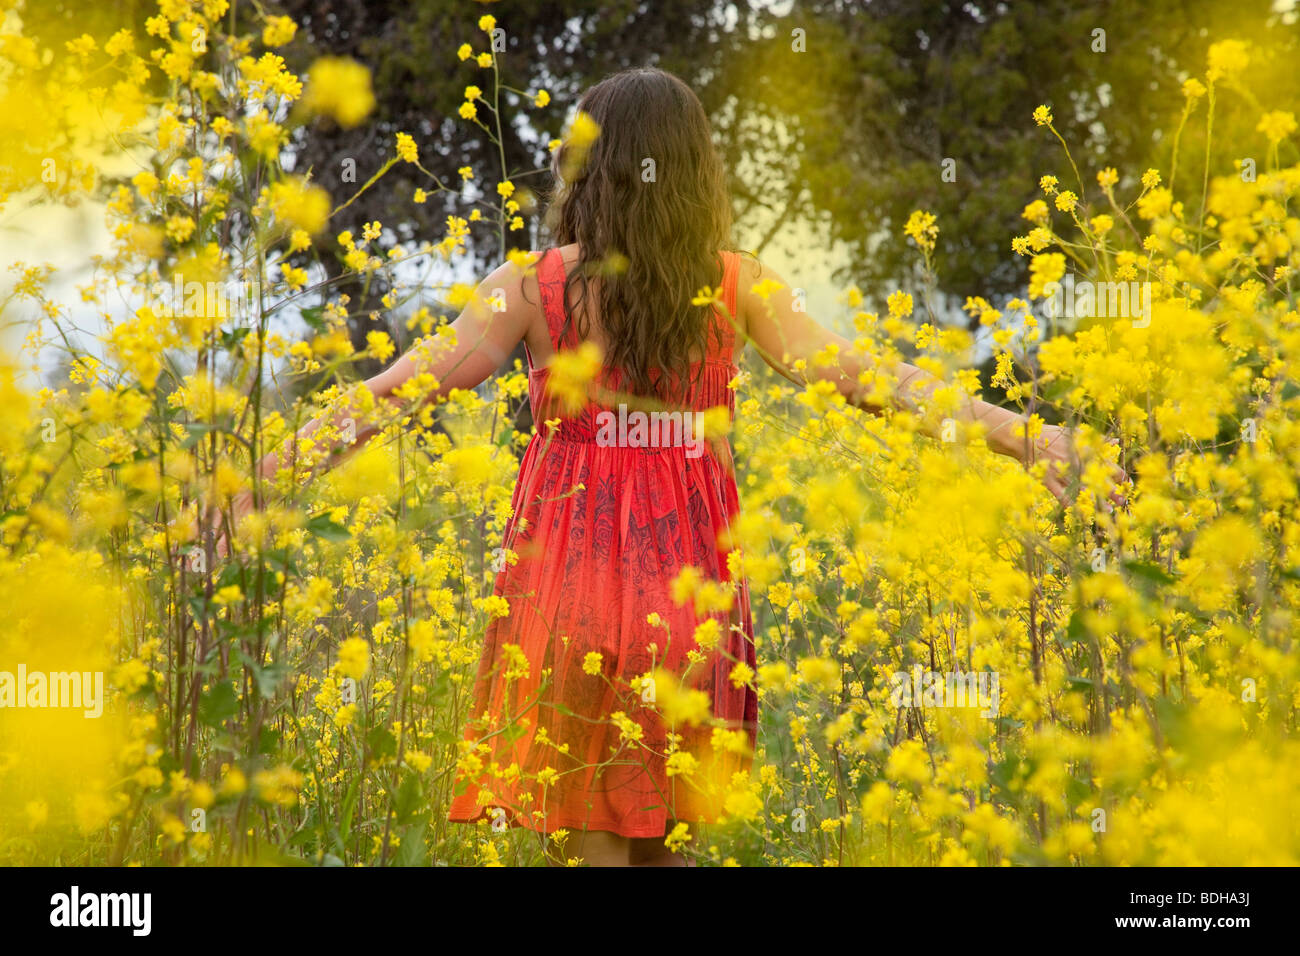 Young woman in a red dress with her hands outstretched walking to the beach through a field of yellow flowers. Stock Photo